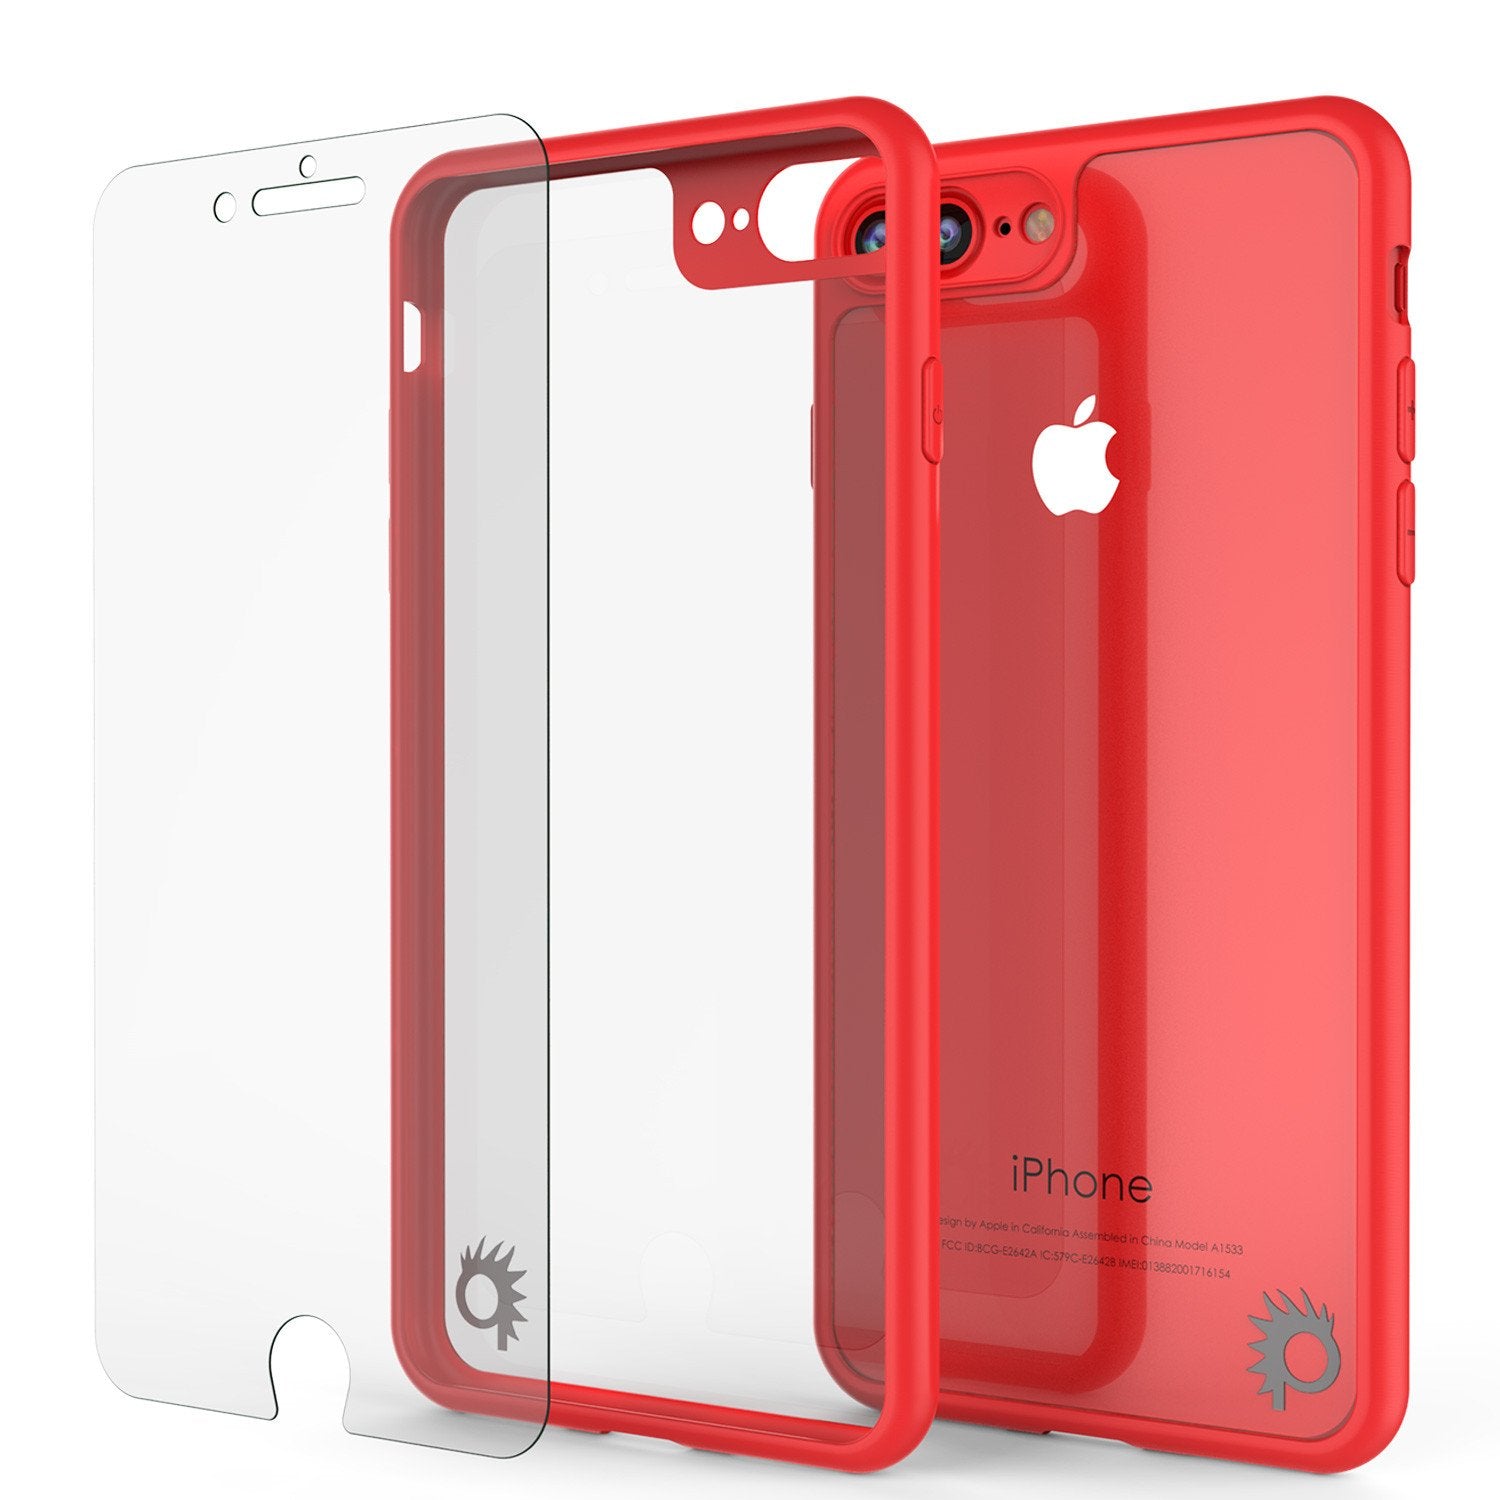 Apple iPhone 8/SE Back - Tempered Glass Screen Protector – Red Zombie